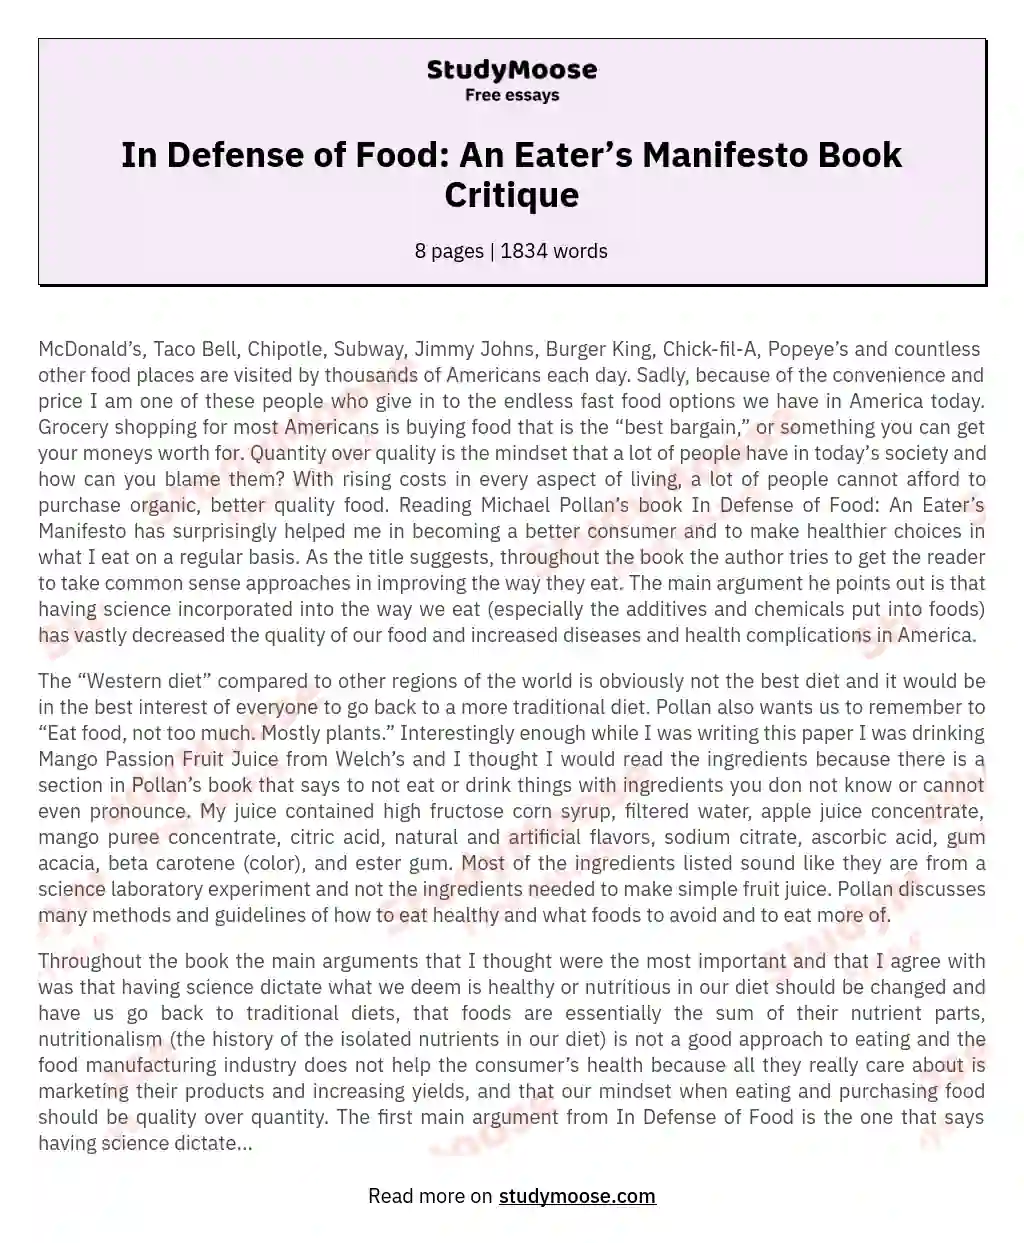 In Defense of Food: An Eater’s Manifesto Book Critique essay